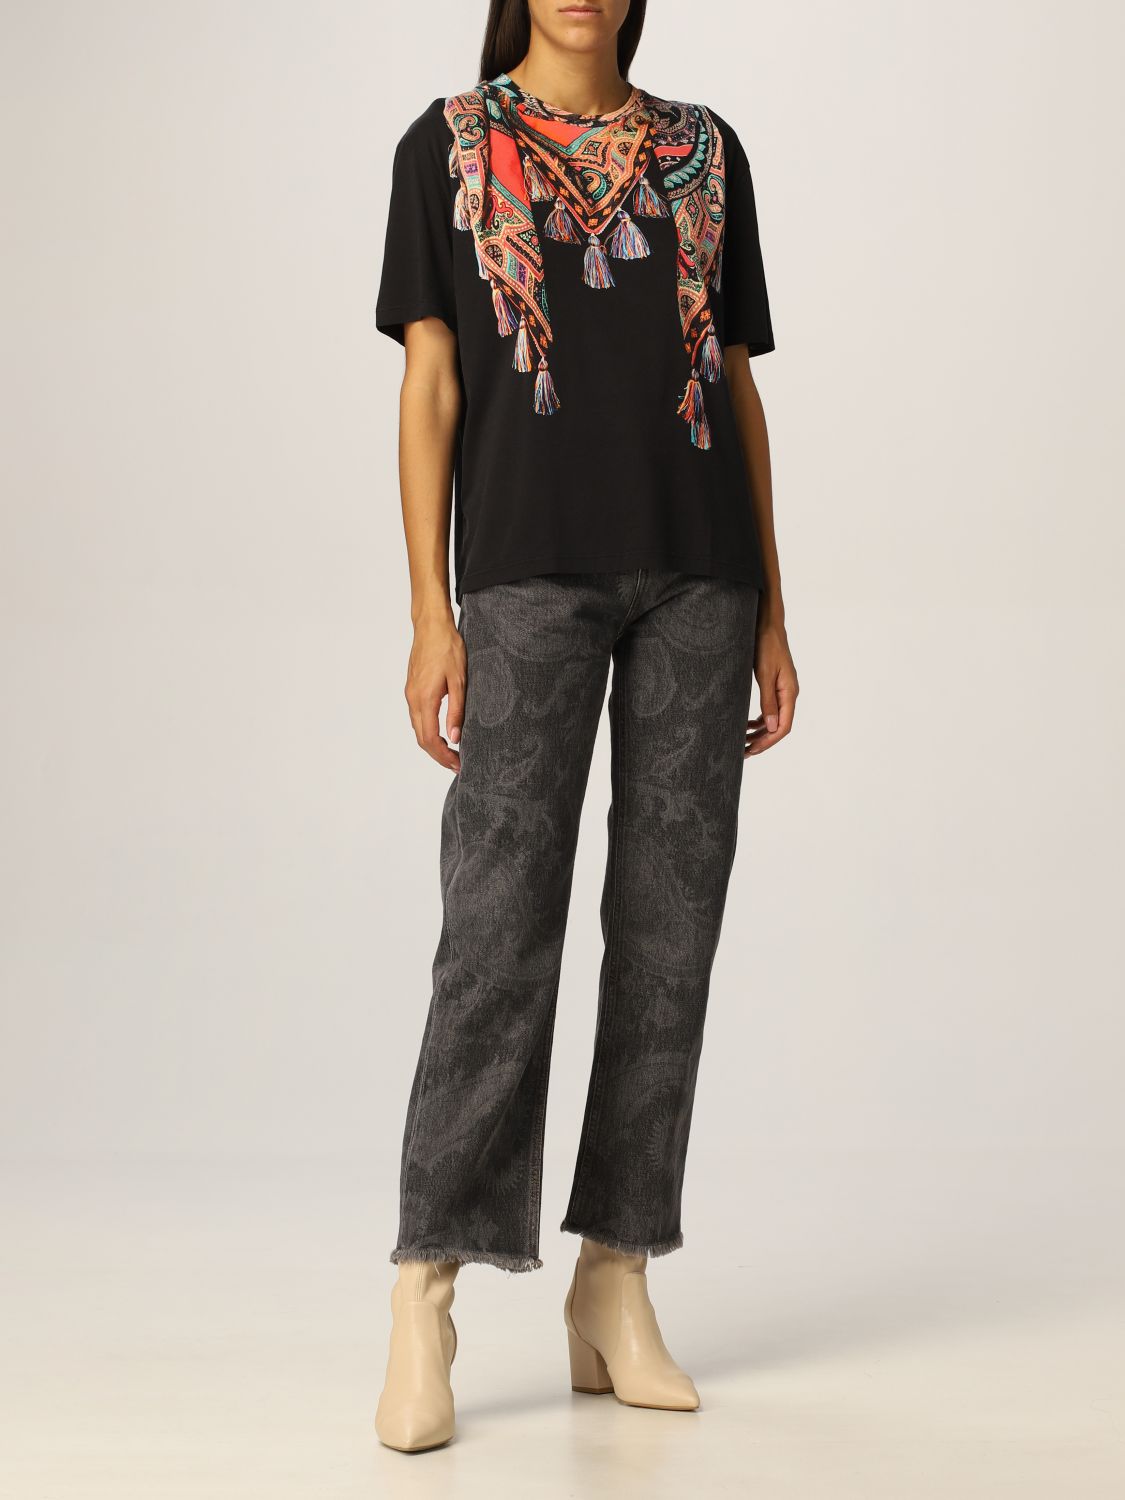 Etro jeans in denim with paisley print